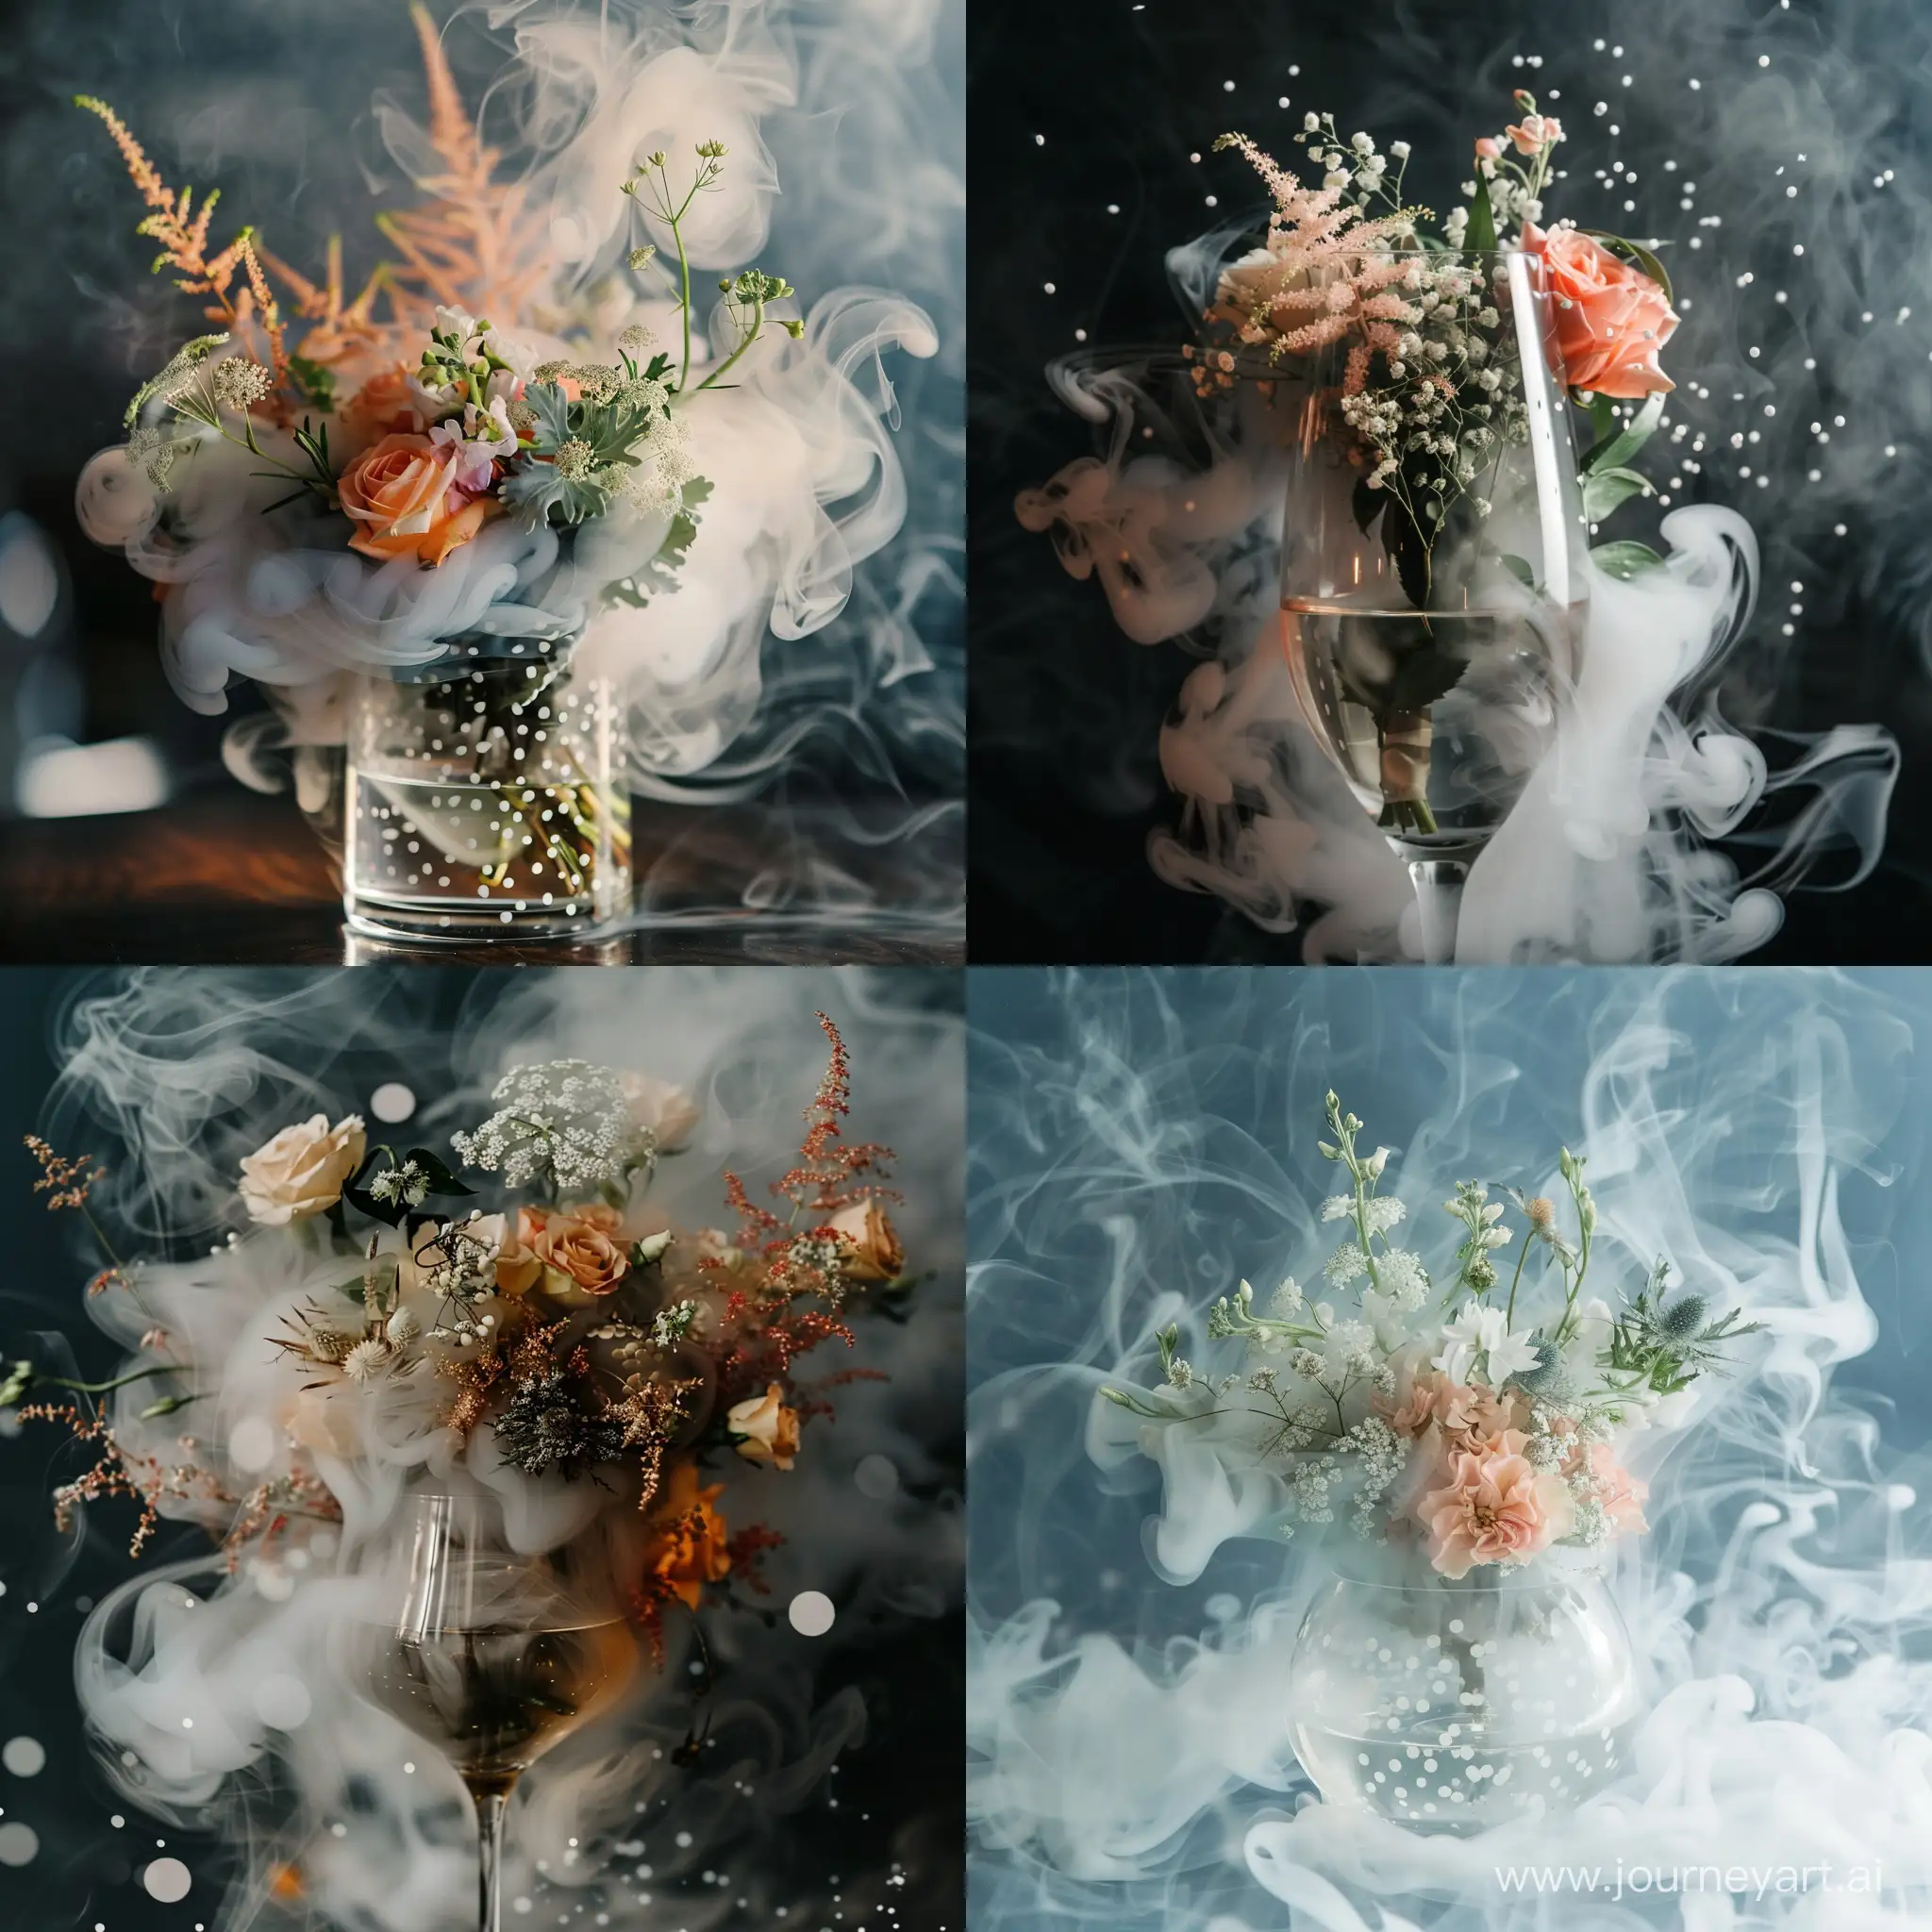 Elegant-Wedding-Bouquet-Enveloped-in-Ethereal-Smoke-and-White-Dots